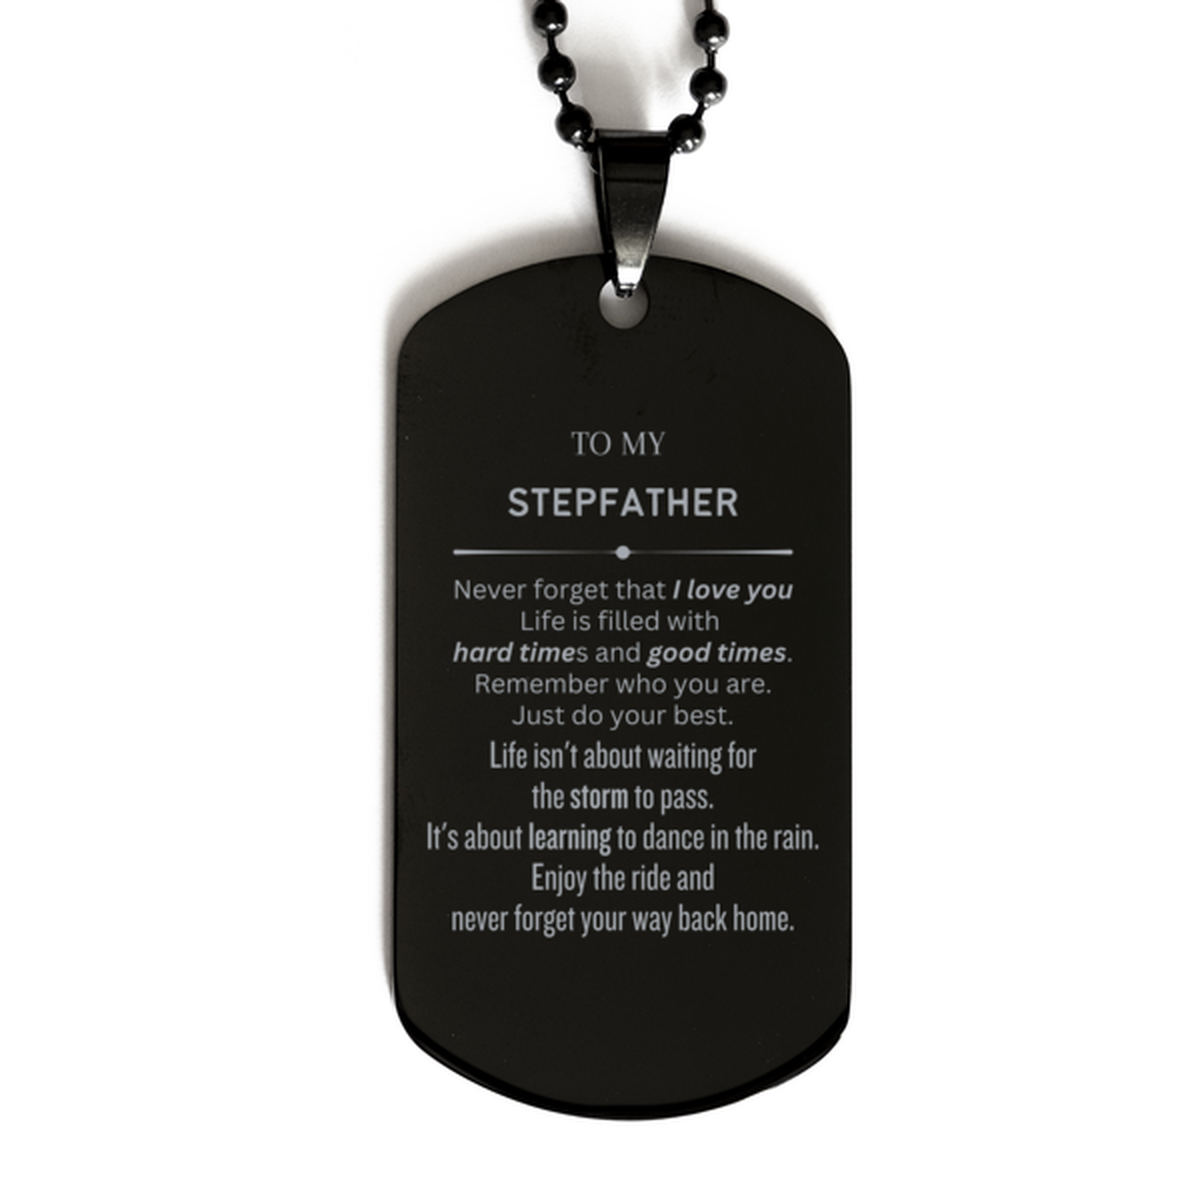 Christmas Stepfather Black Dog Tag Gifts, To My Stepfather Birthday Thank You Gifts For Stepfather, Graduation Unique Gifts For Stepfather To My Stepfather Never forget that I love you life is filled with hard times and good times. Remember who you are. J